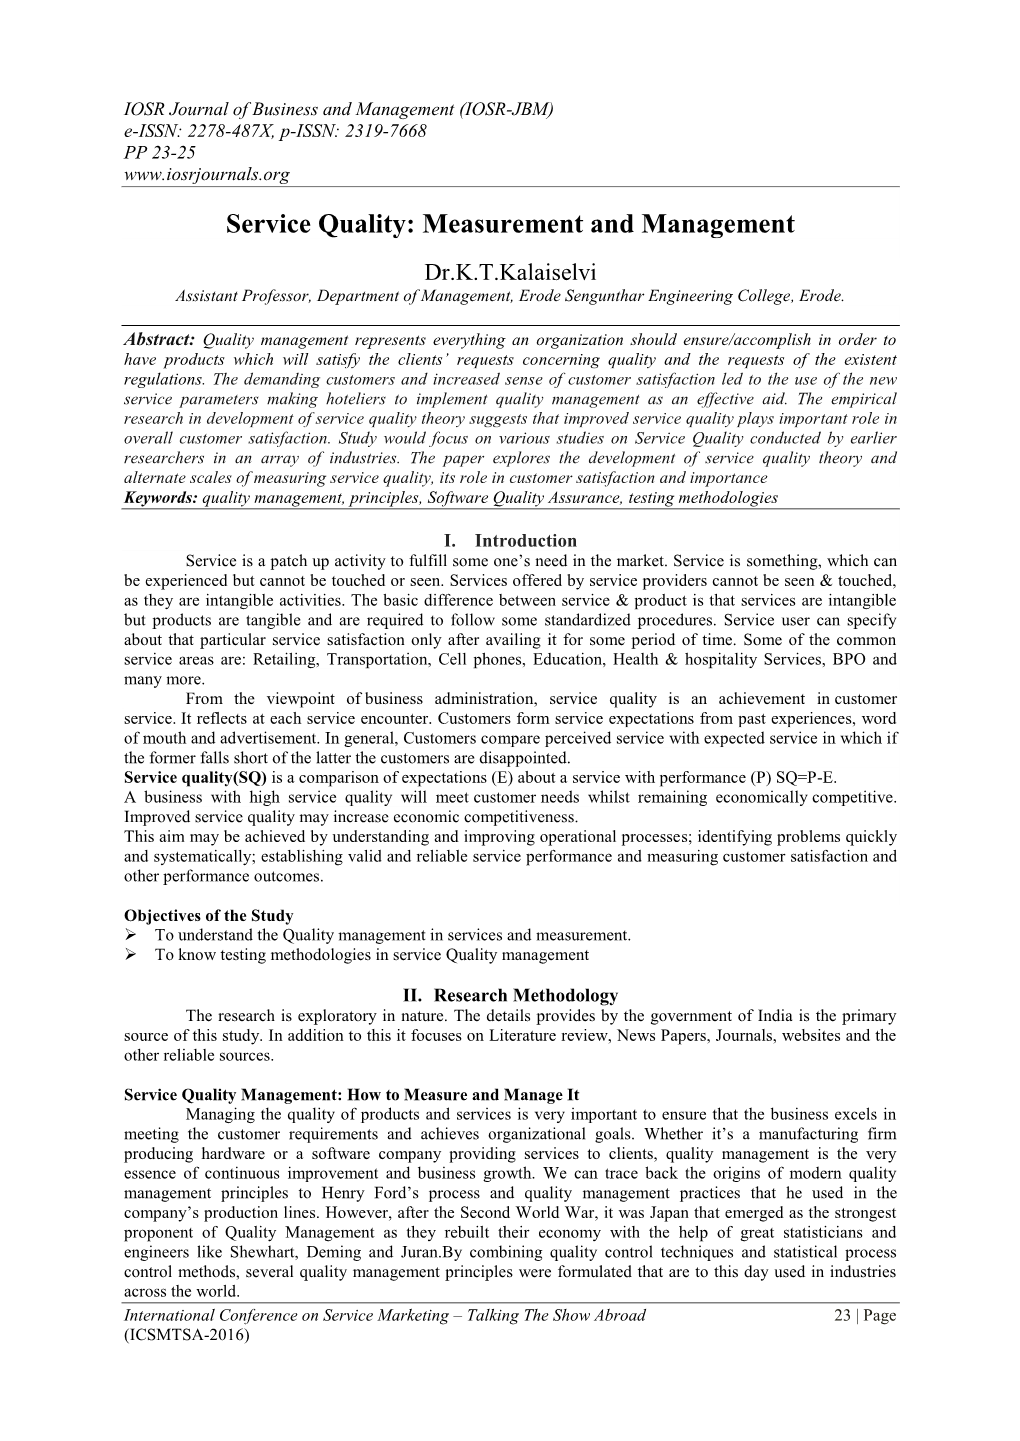 Service Quality: Measurement and Management